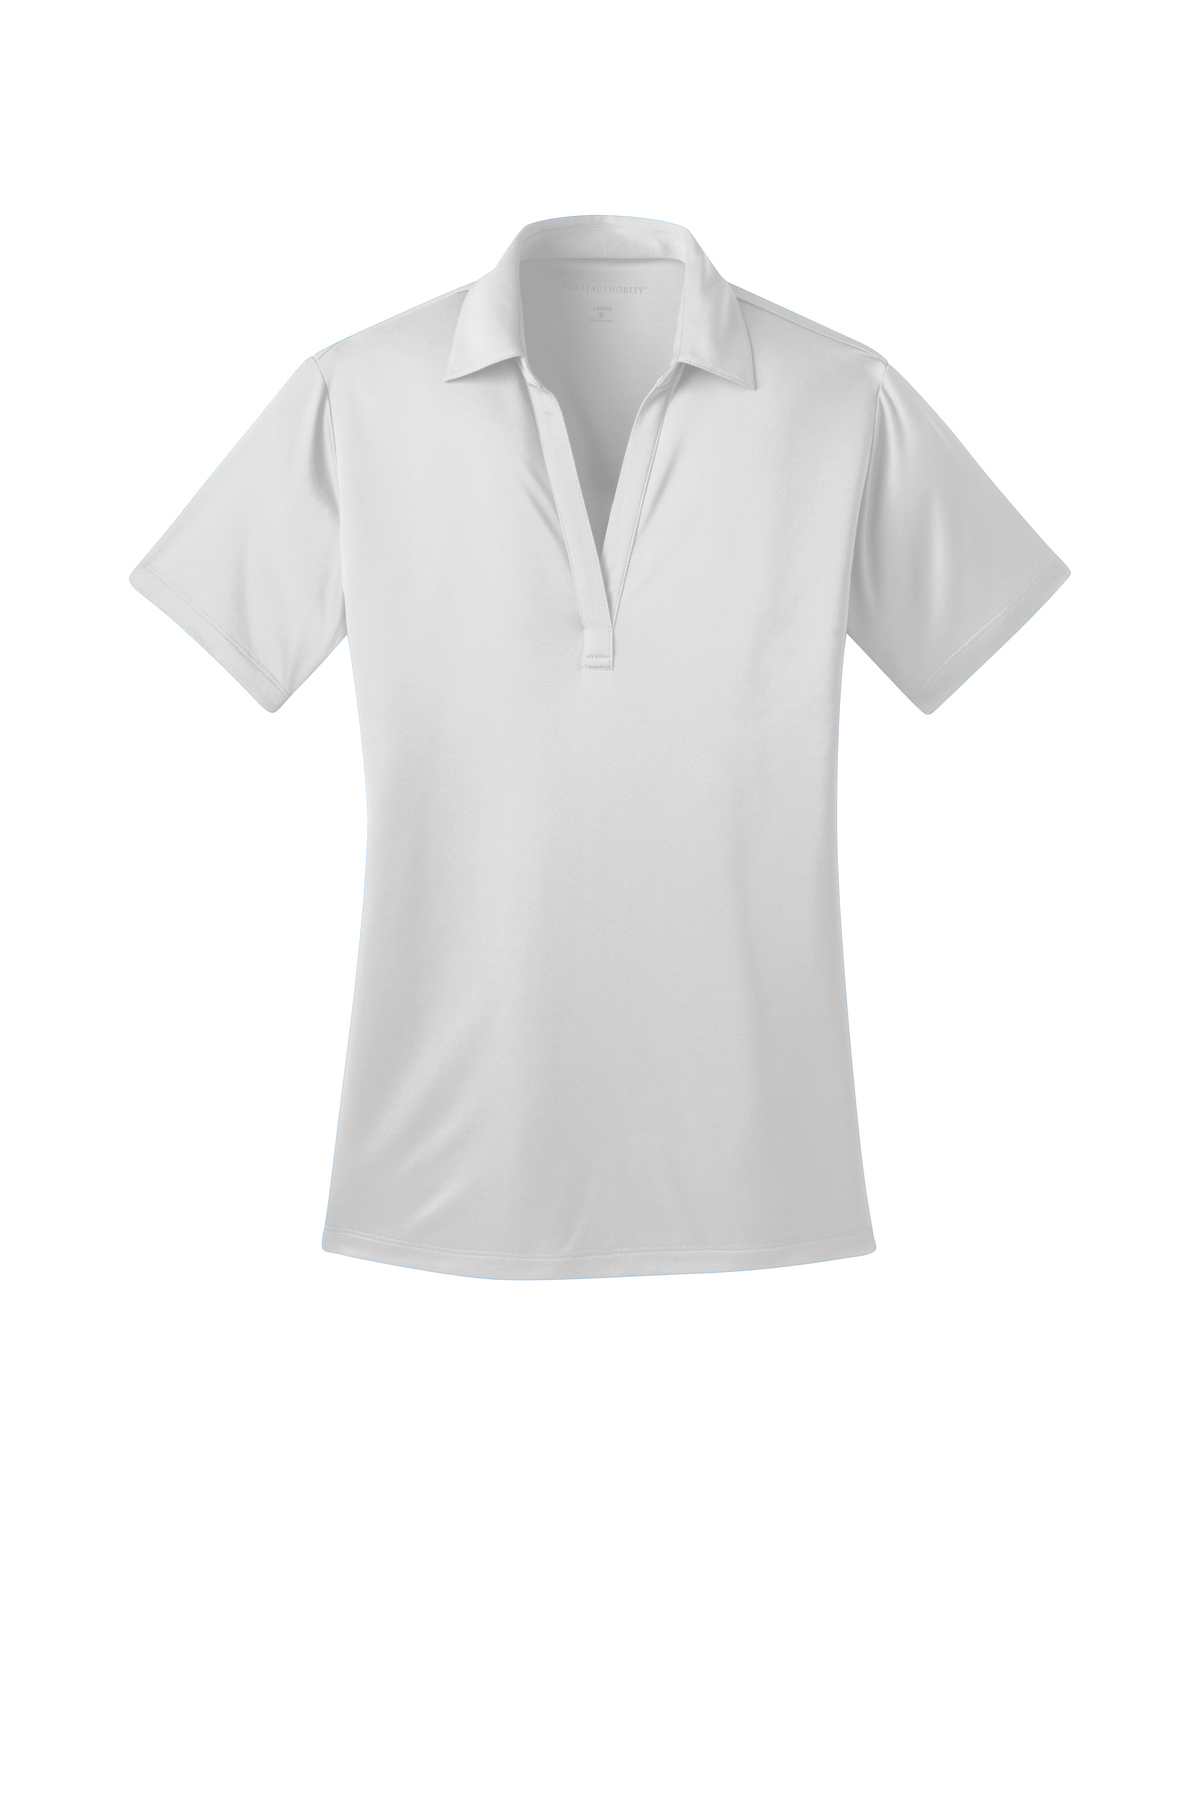 100% Polyester Ladies Performance Polo shirt with logo-TM